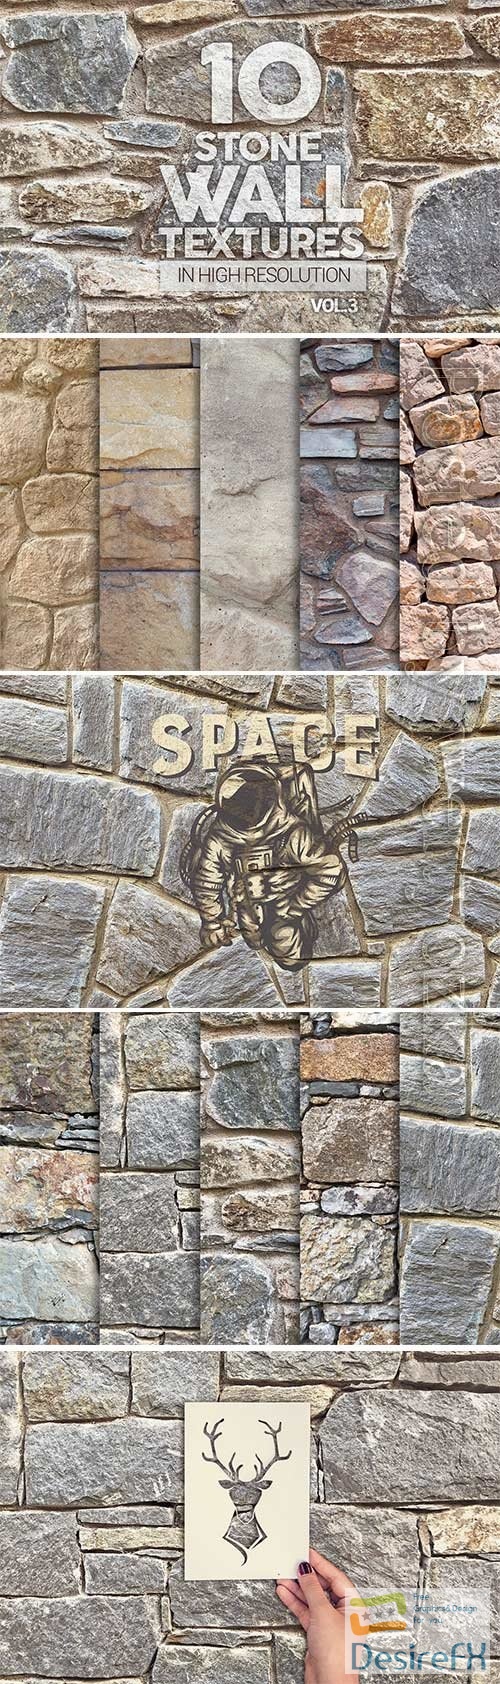 Stone Wall Textures x10 Vol.3